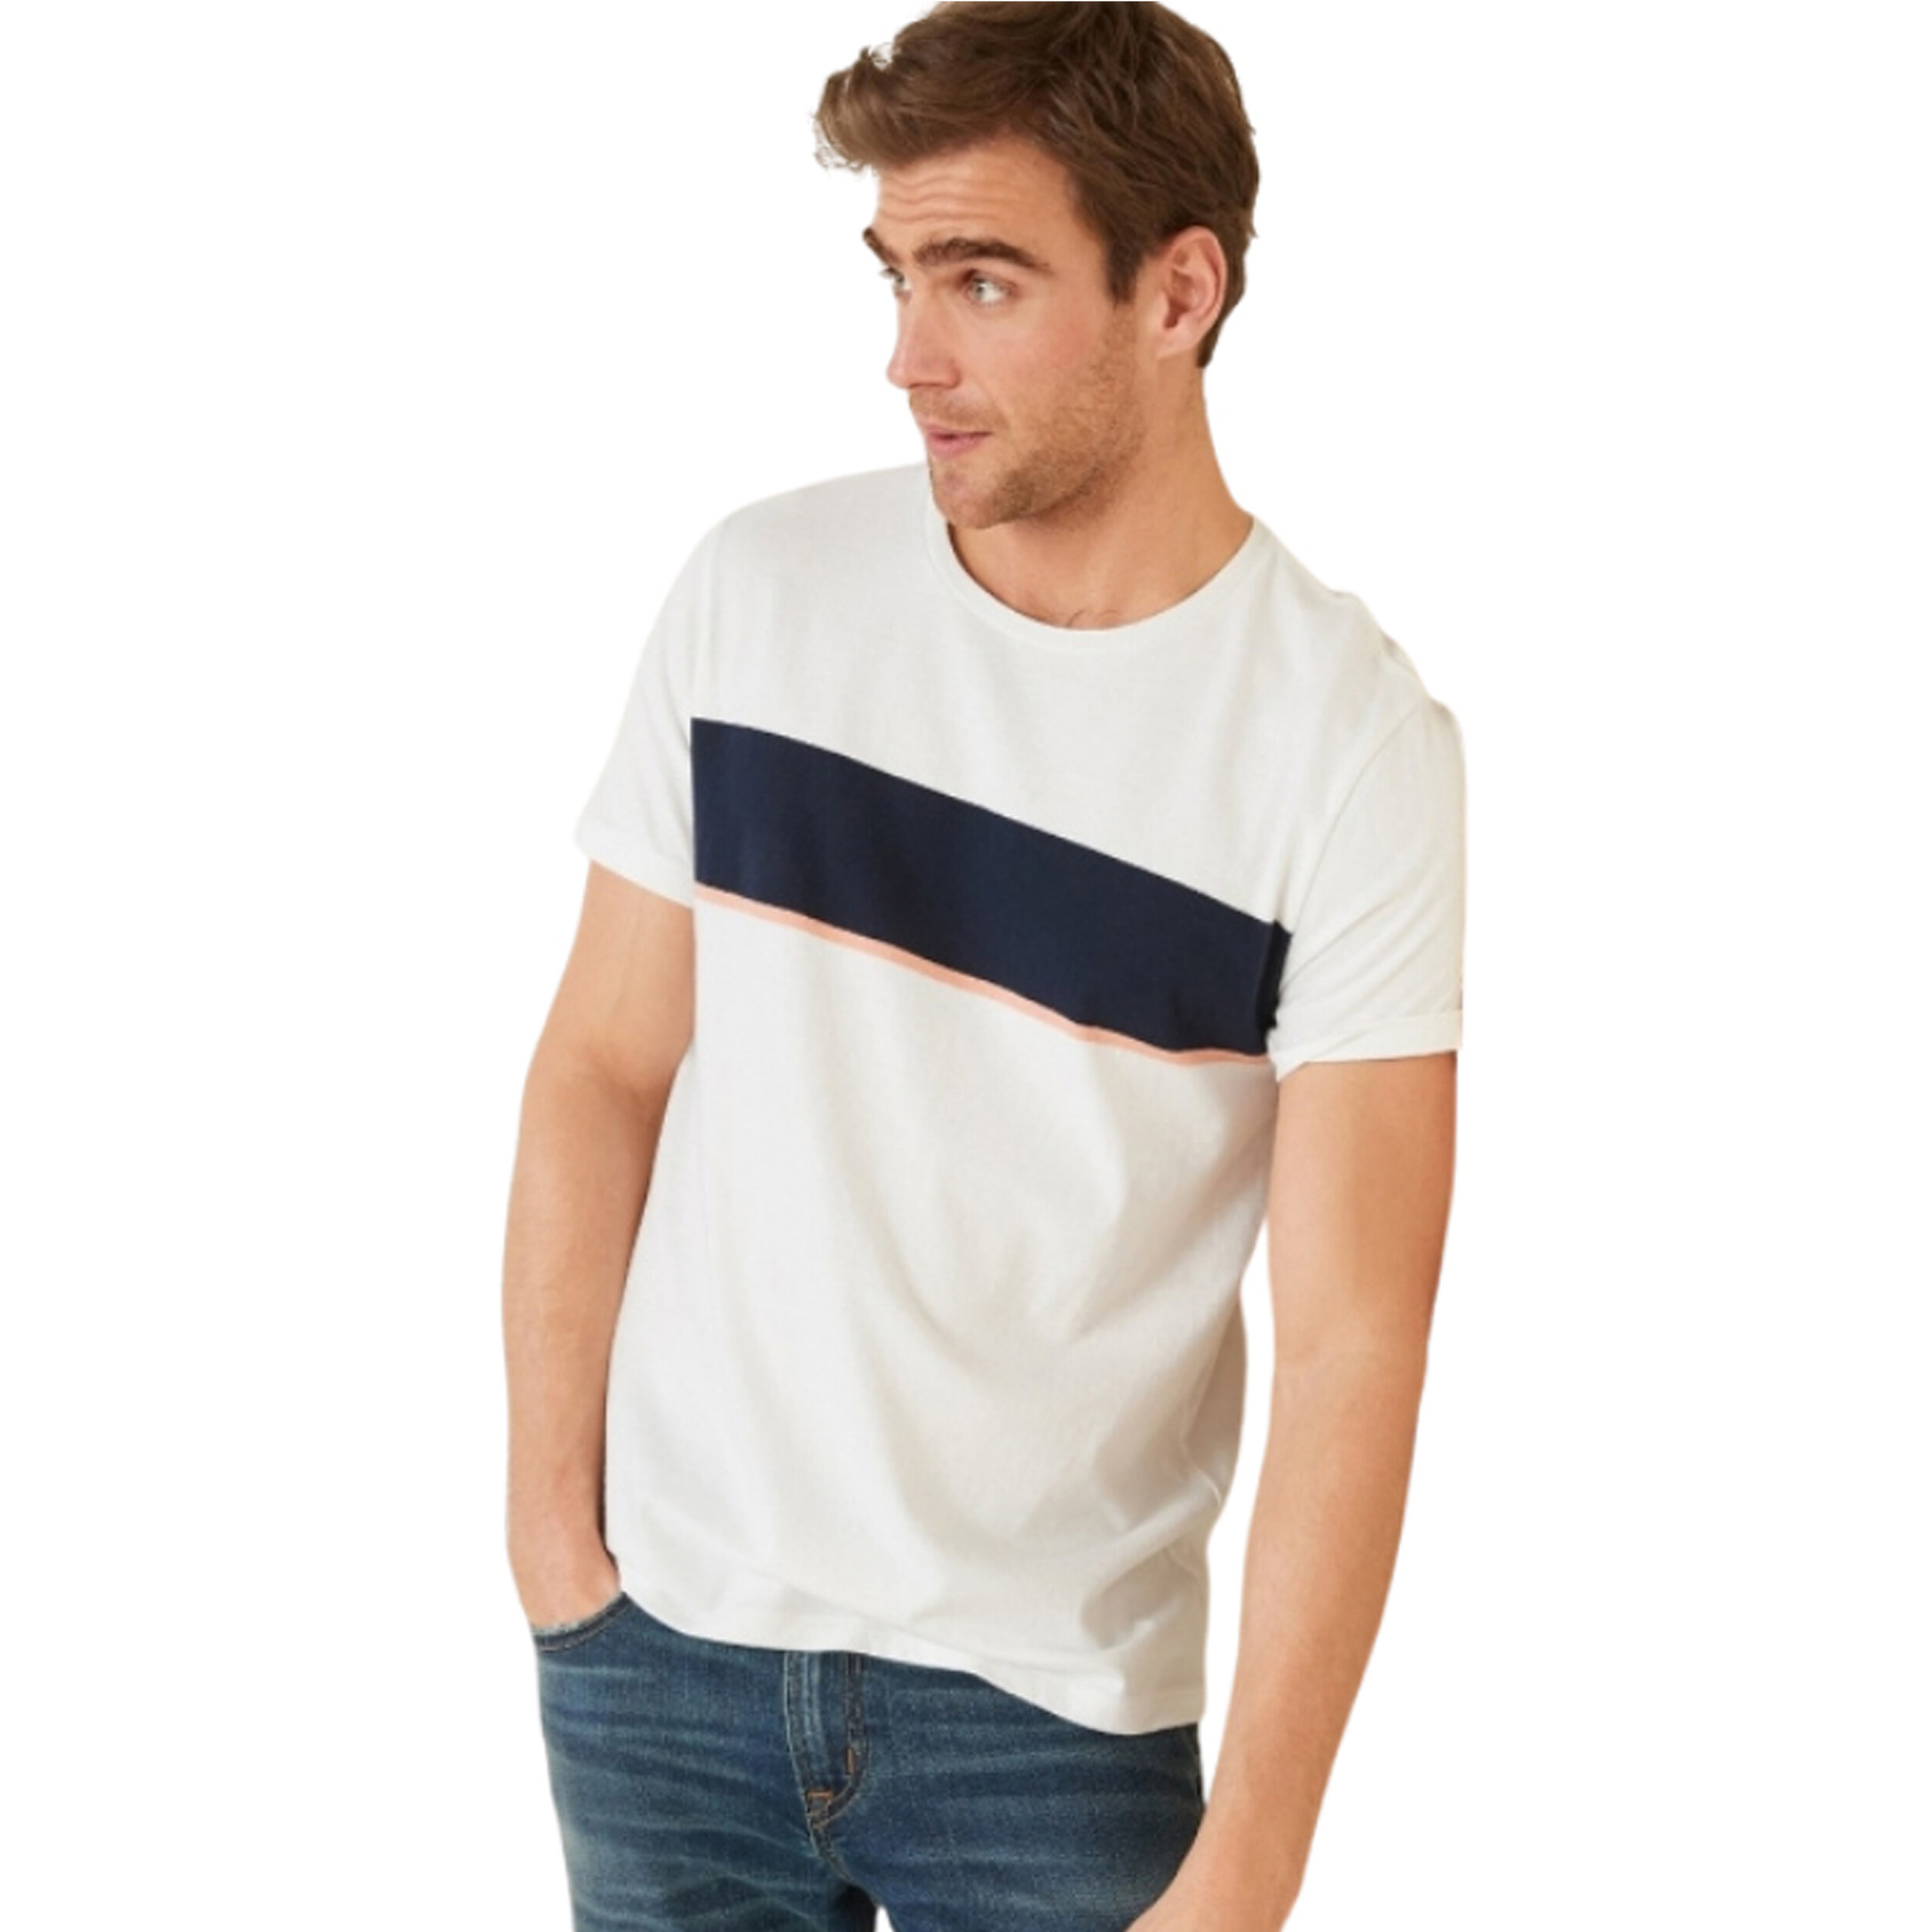  Soft Washed Chest Stripe Crew Neck Tee for Men, Old Navy P795 